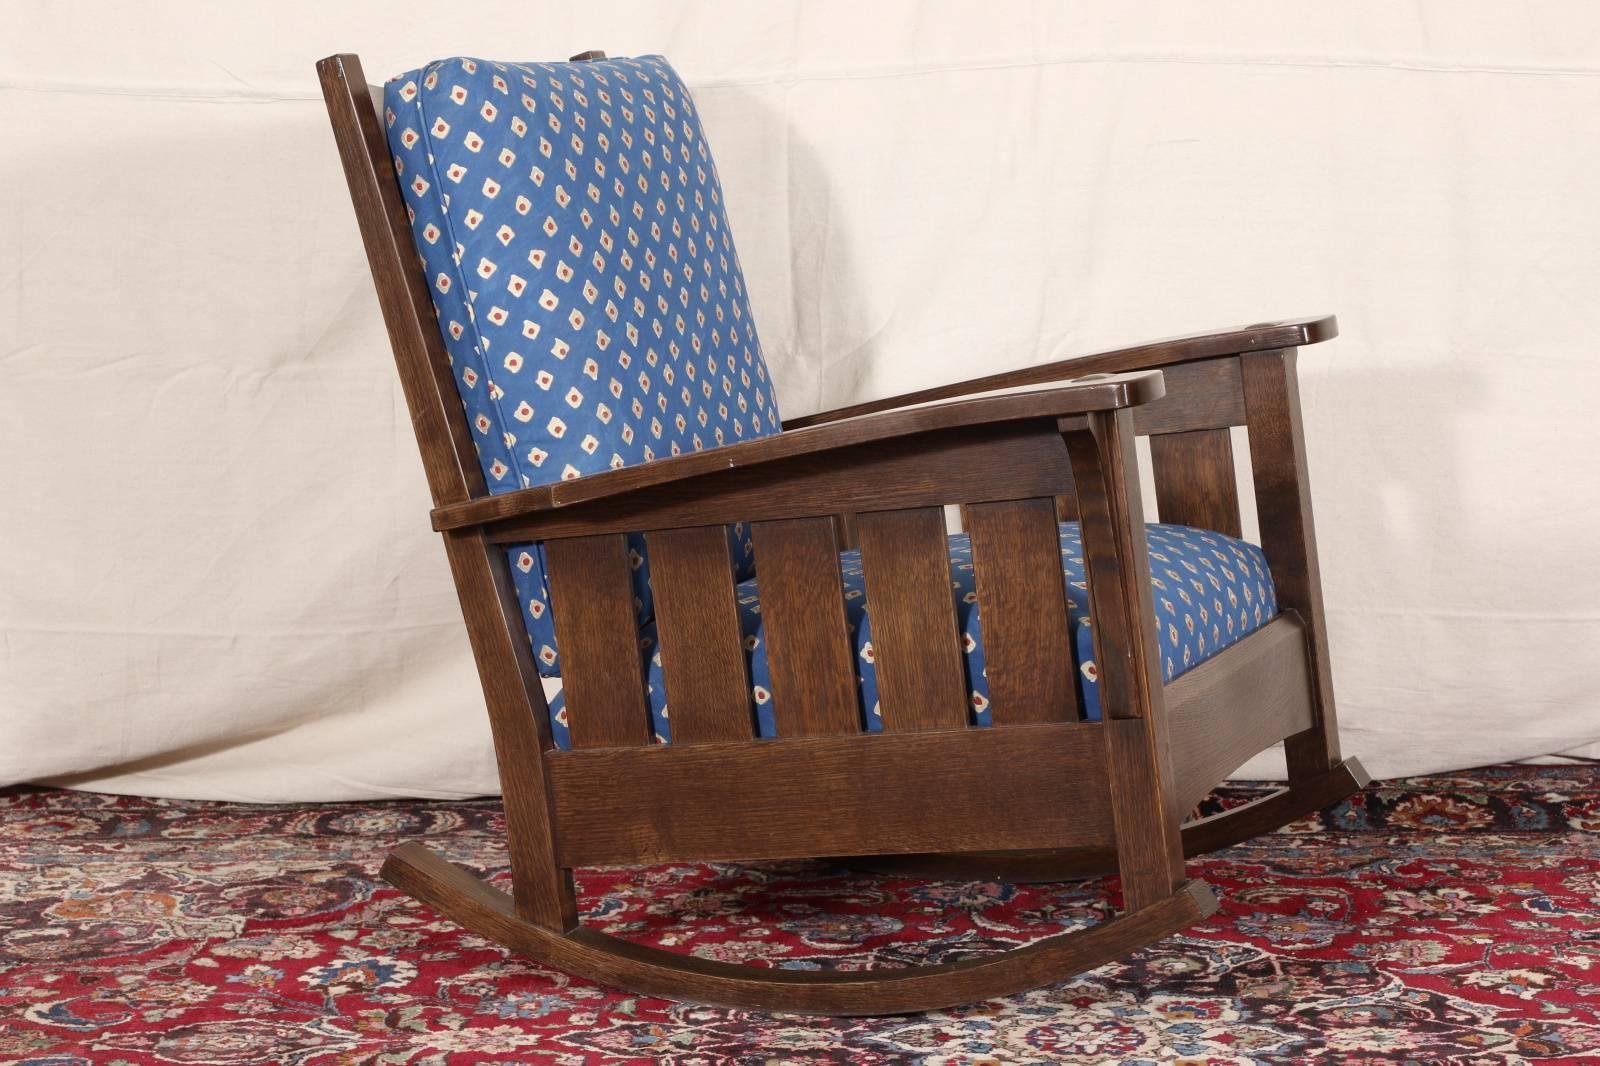 Stickley quarter sawn oak rocker, horizontal slatted back and vertical slatted sides, back and seat cushions upholstered in blue with white and red geometric pattern.

Condition: Expected wear and signs of use including some light surface